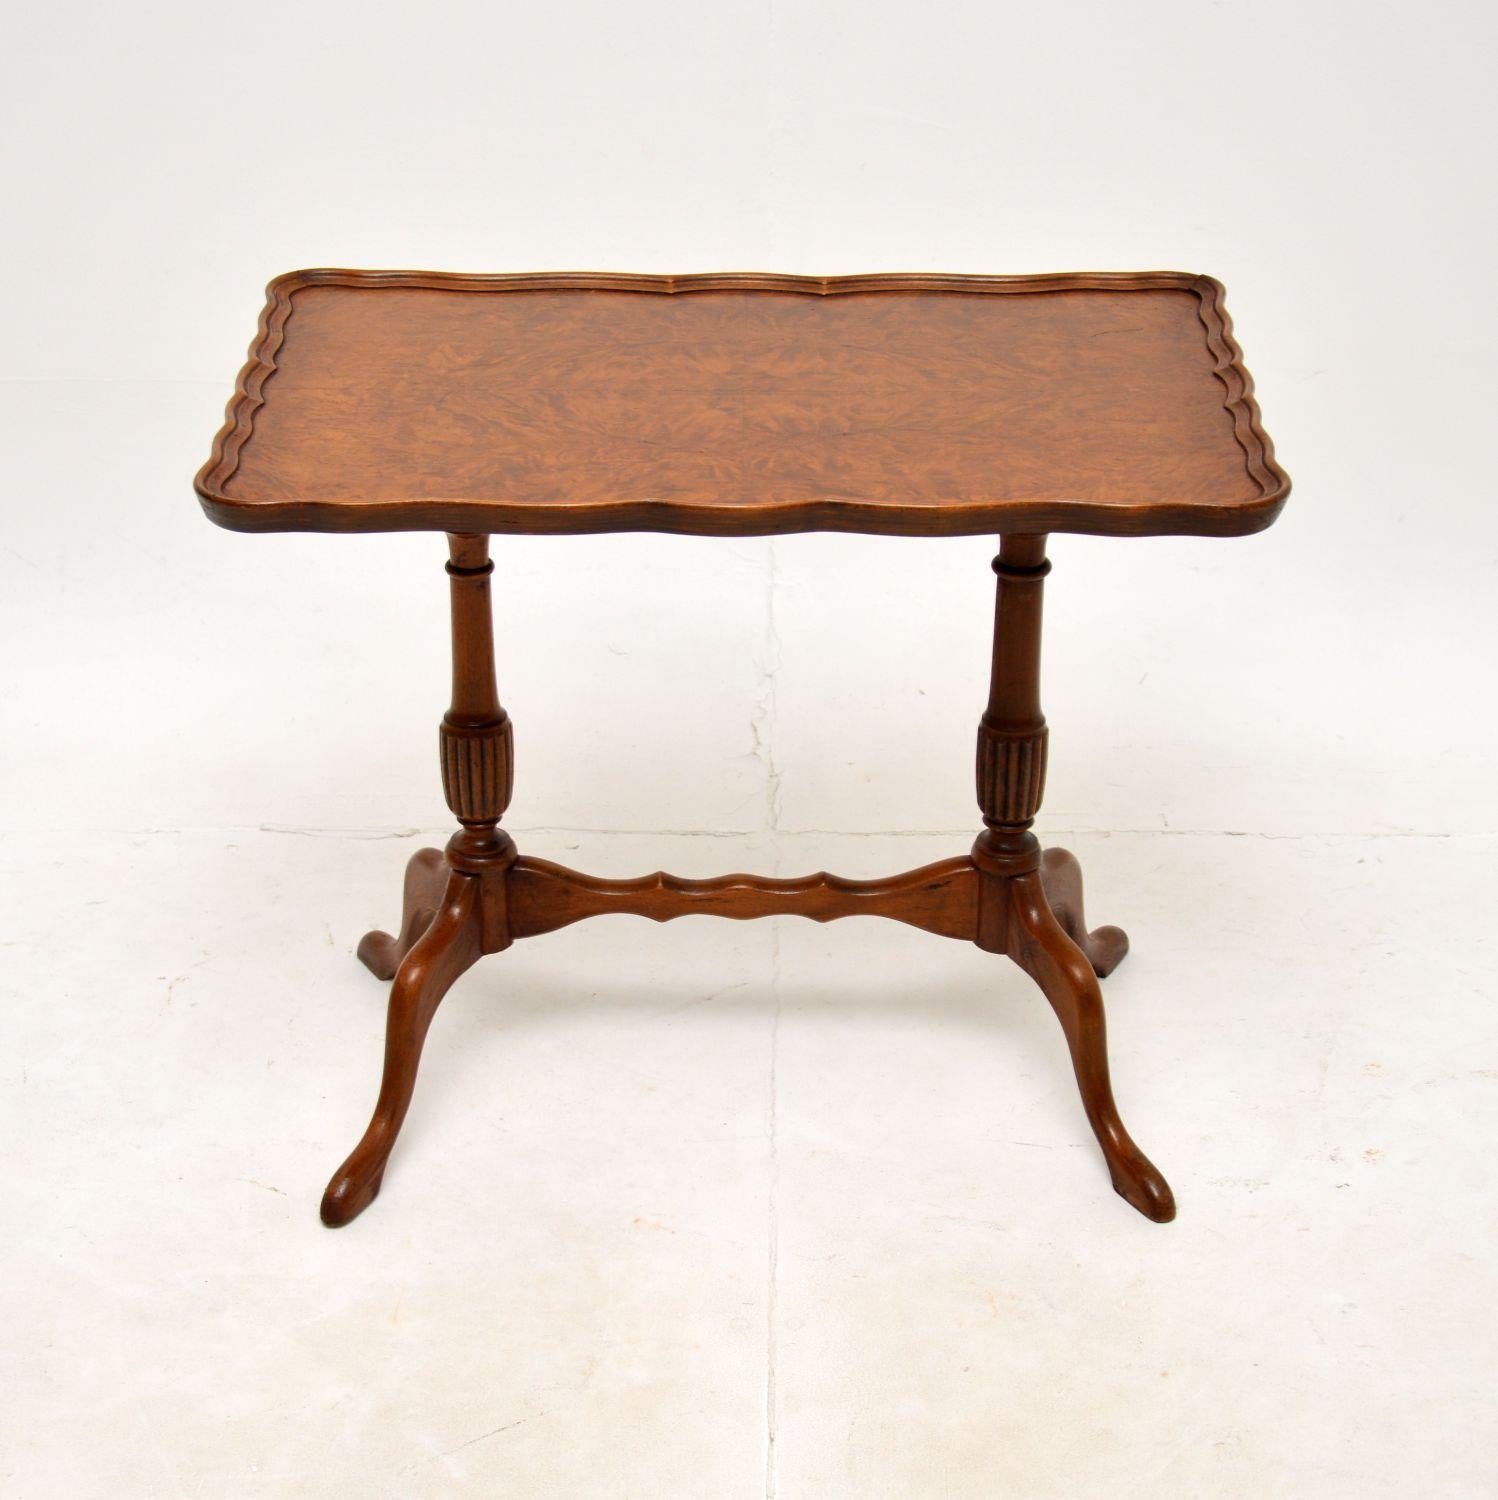 A lovely antique burr walnut pie crust coffee / side table. This was made in England, it dates from around the 1930-50’s.

The quality is superb and this is a very useful size to be used as a coffee table or a side table. The rectangular top has a